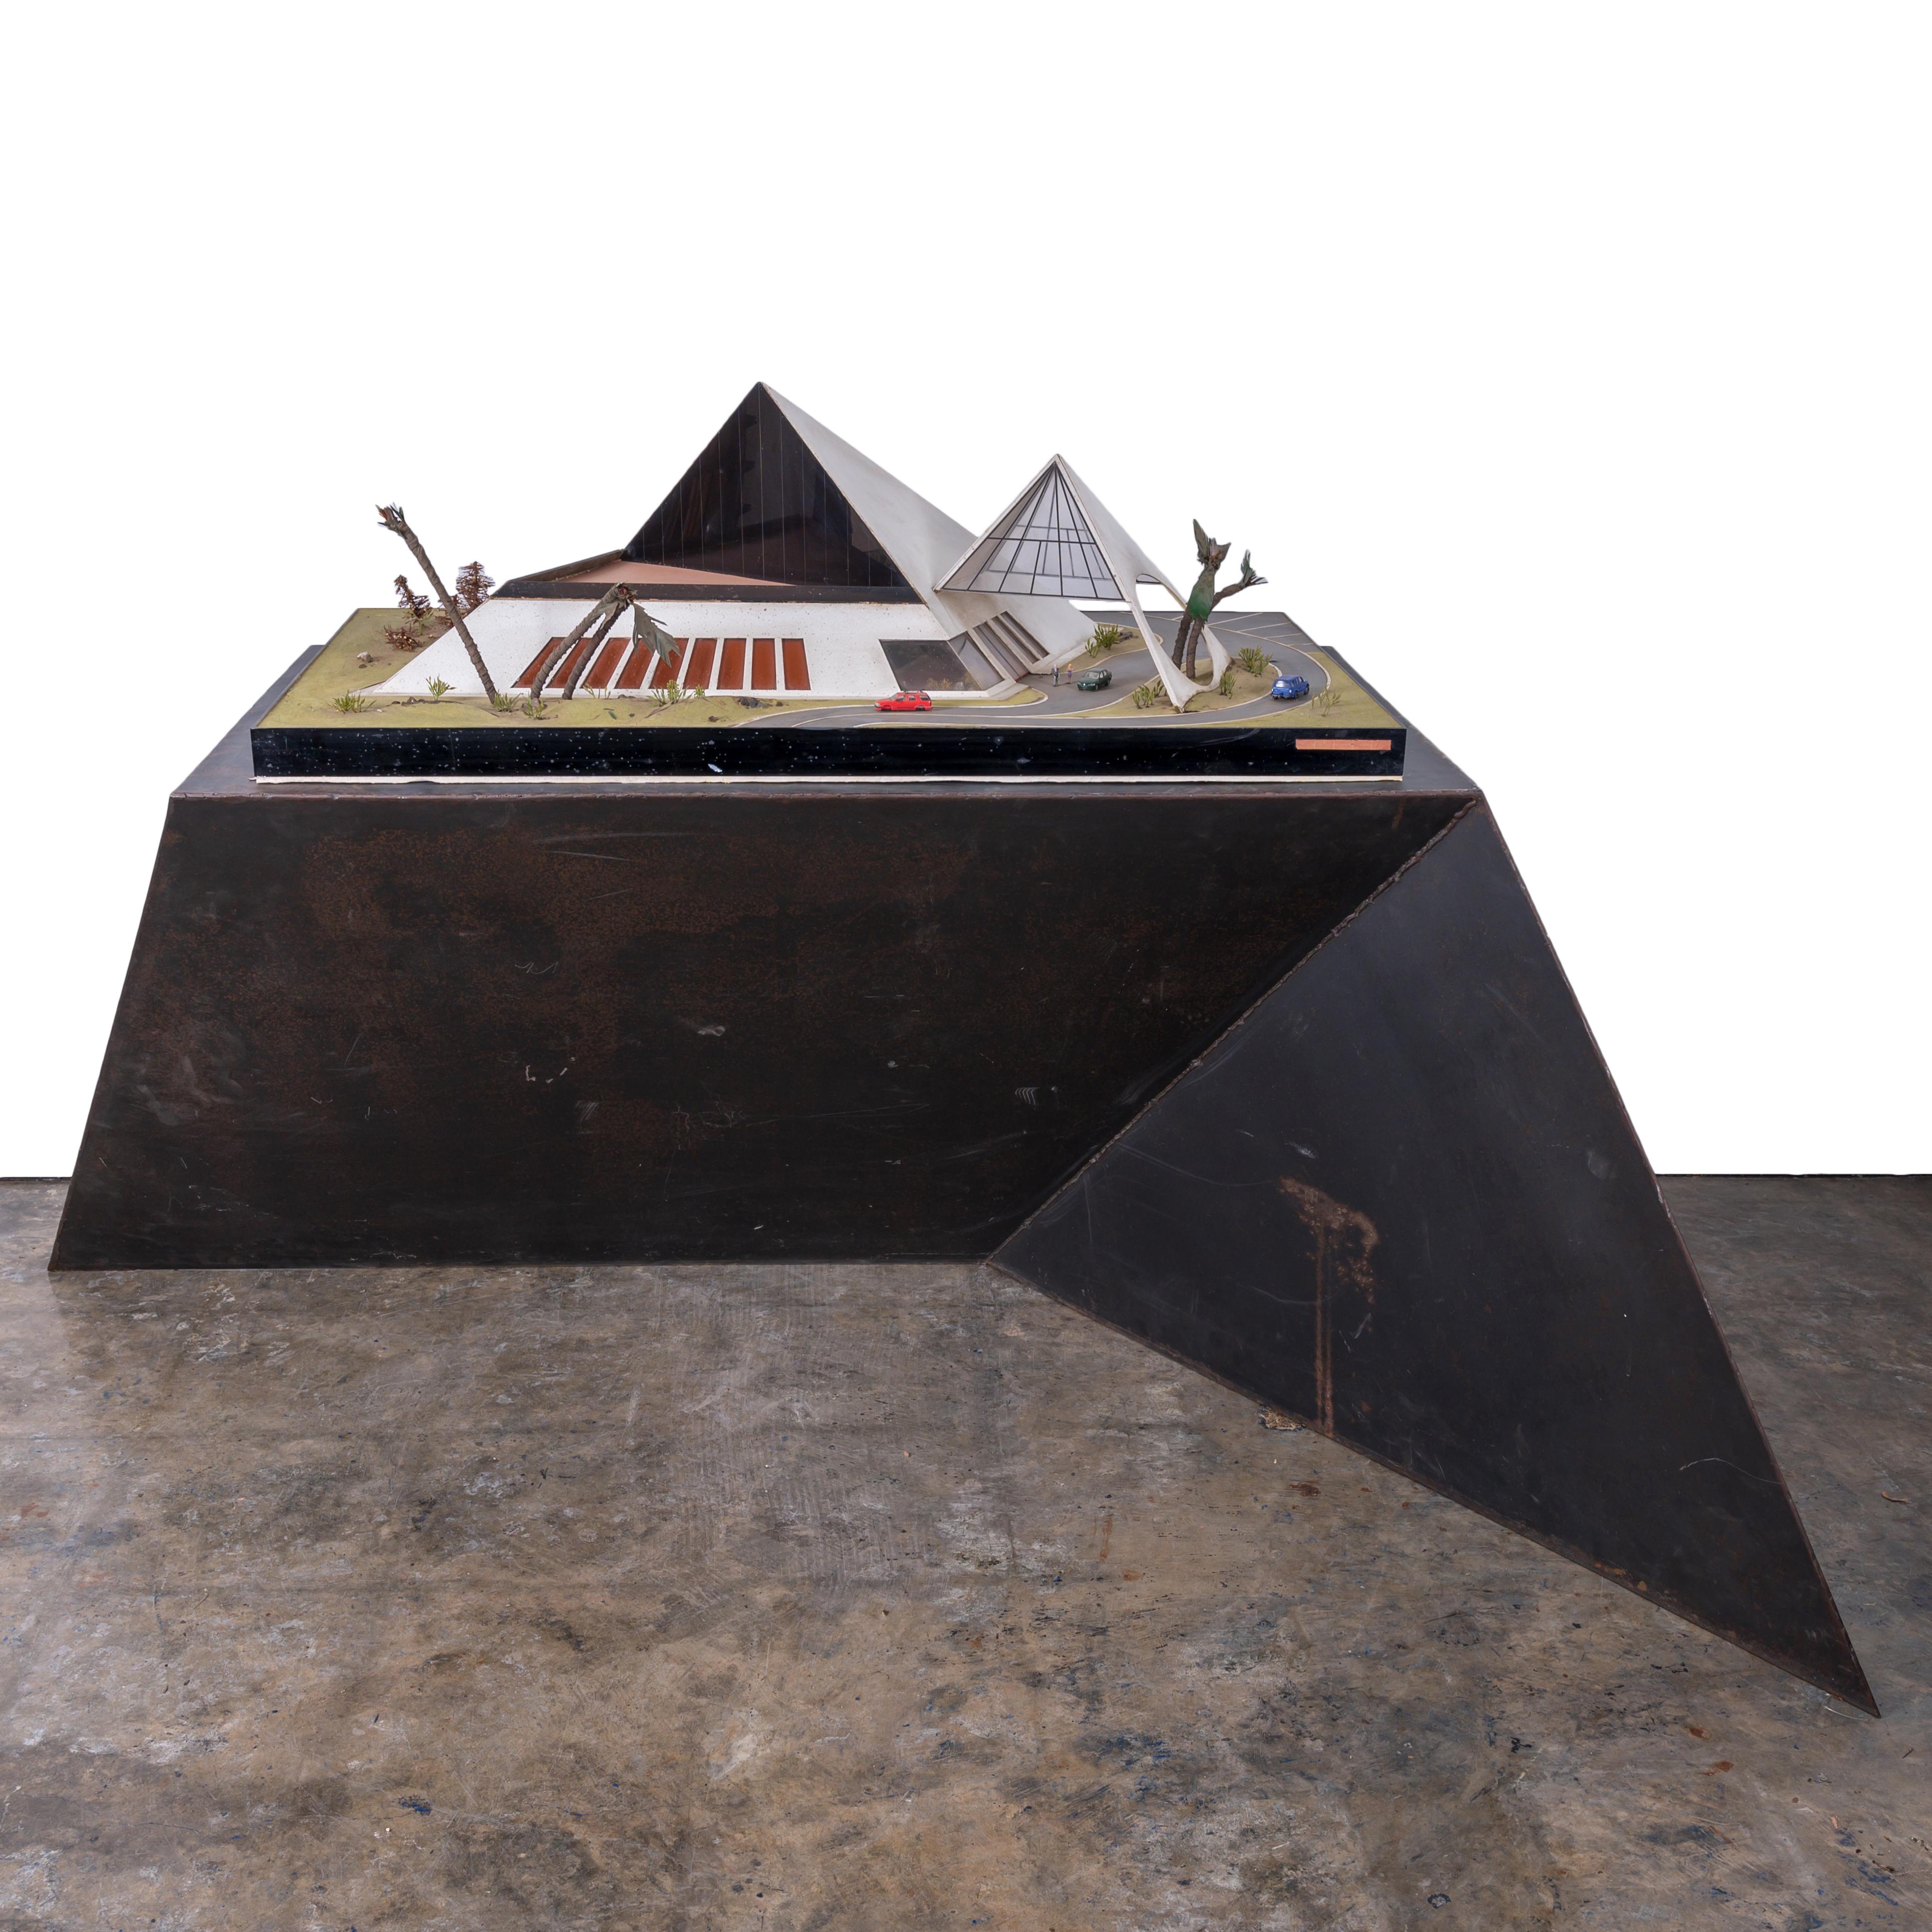 Giovanni 'John' Bucci
(Italian-American, 1935-2019)

A conceptual futuristic restaurant and nightclub model. 
fiberglass, acrylic and various media

40 inches wide by 23 inches deep by 15 inches tall